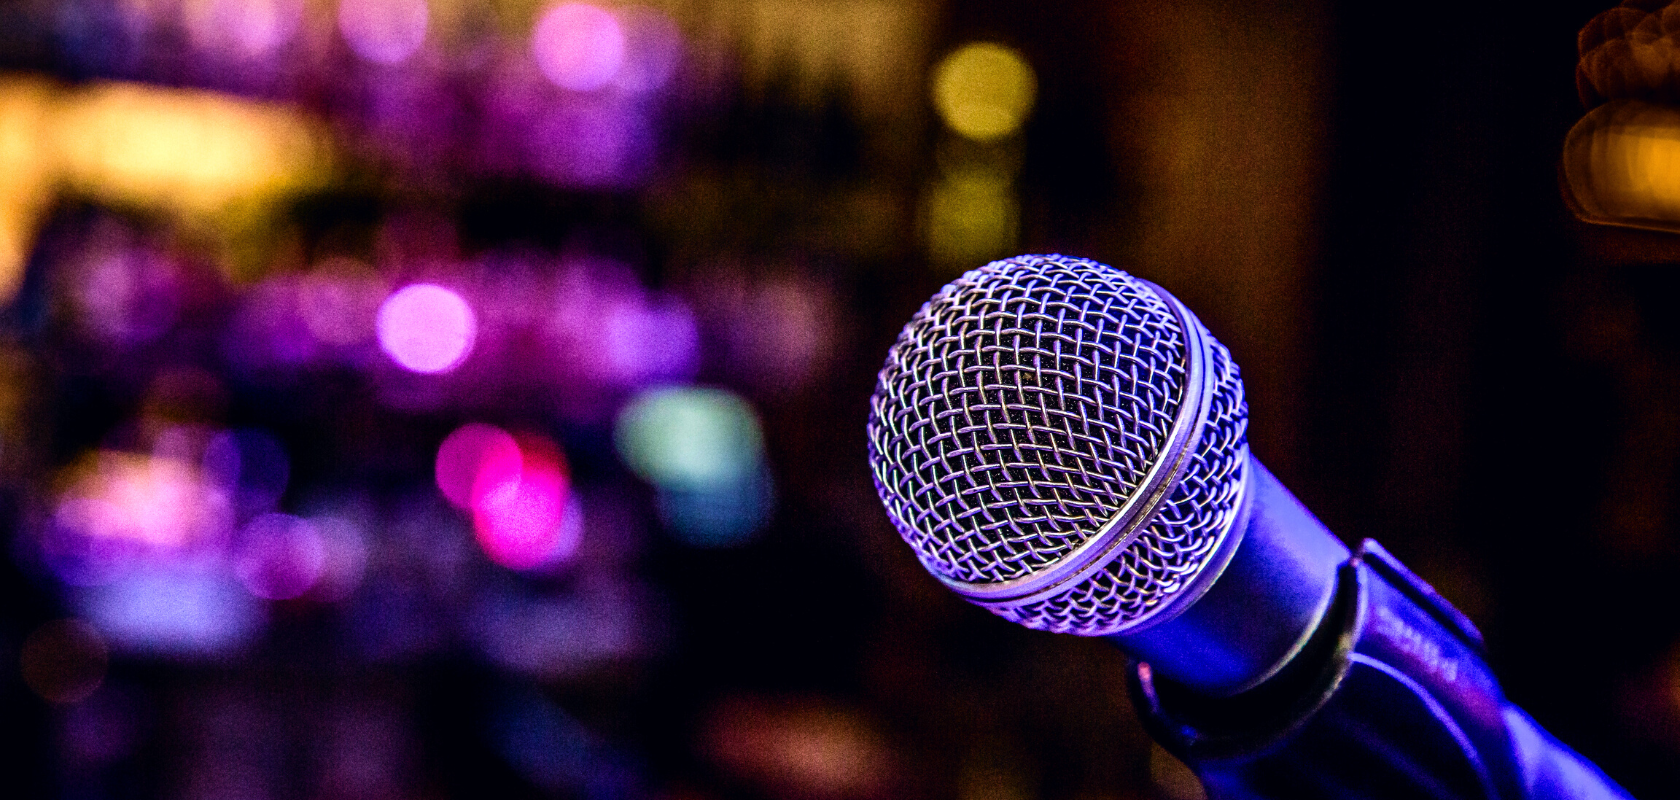 Image of a microphone in front of a dimmed light background with colourful lights.